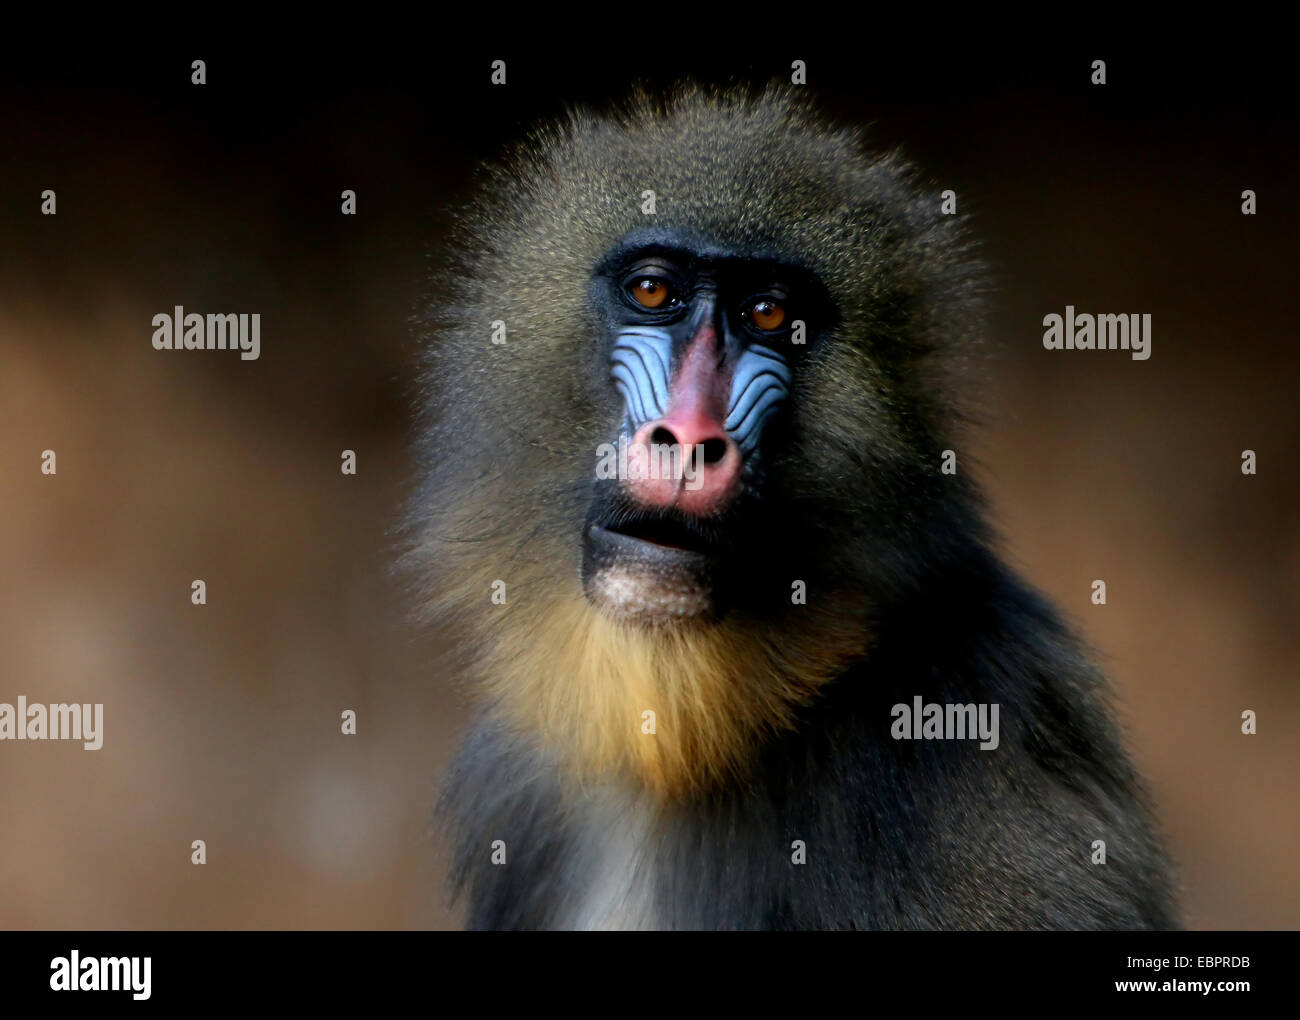 Colorful face of a  Mandrill monkey (Mandrillus sphinx) Stock Photo